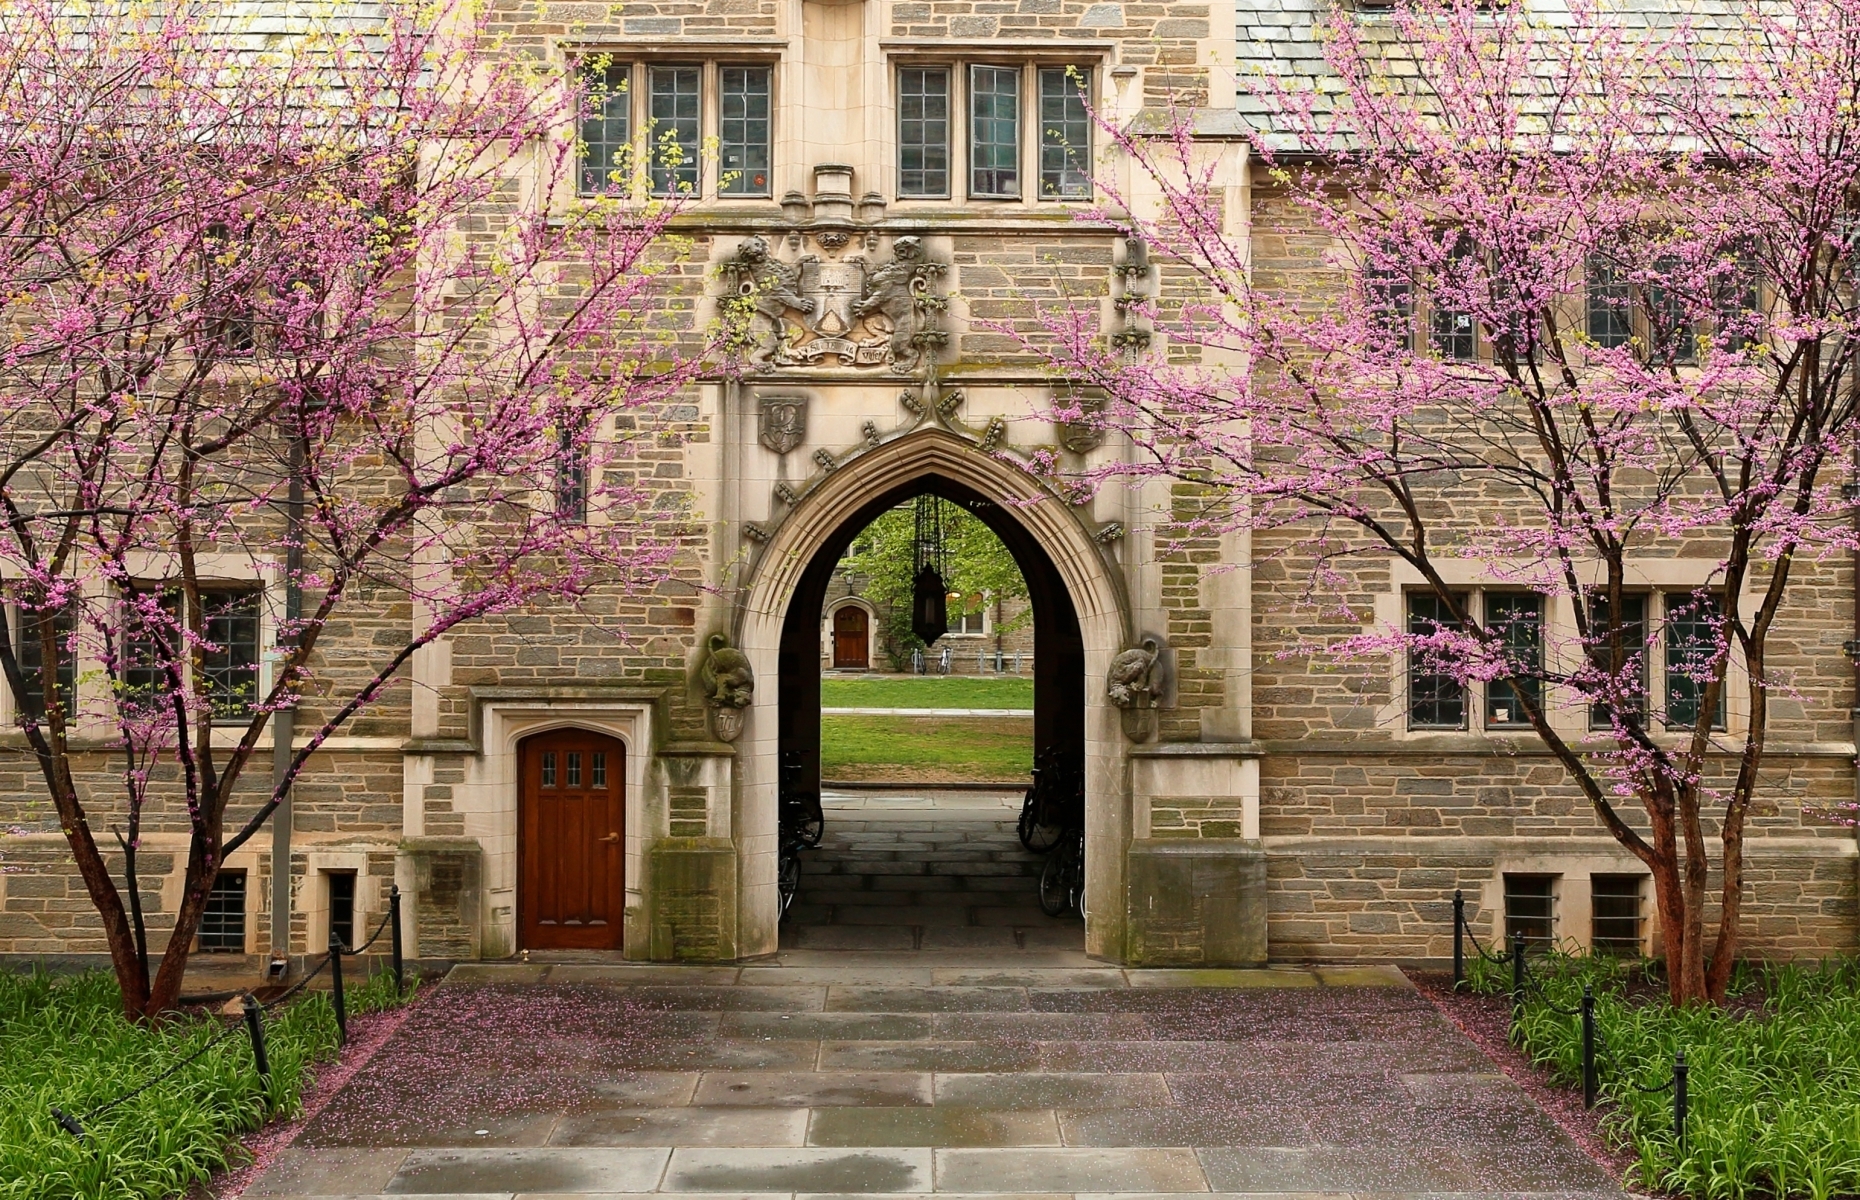 <p>Another Ivy League institution, <a href="https://www.princeton.edu/" rel="noreferrer noopener">Princeton University</a> has a majestic entrance road lined with Princeton elm trees, along with plenty of Collegiate Gothic buildings with ornate arches and walls draped in ivy.</p>